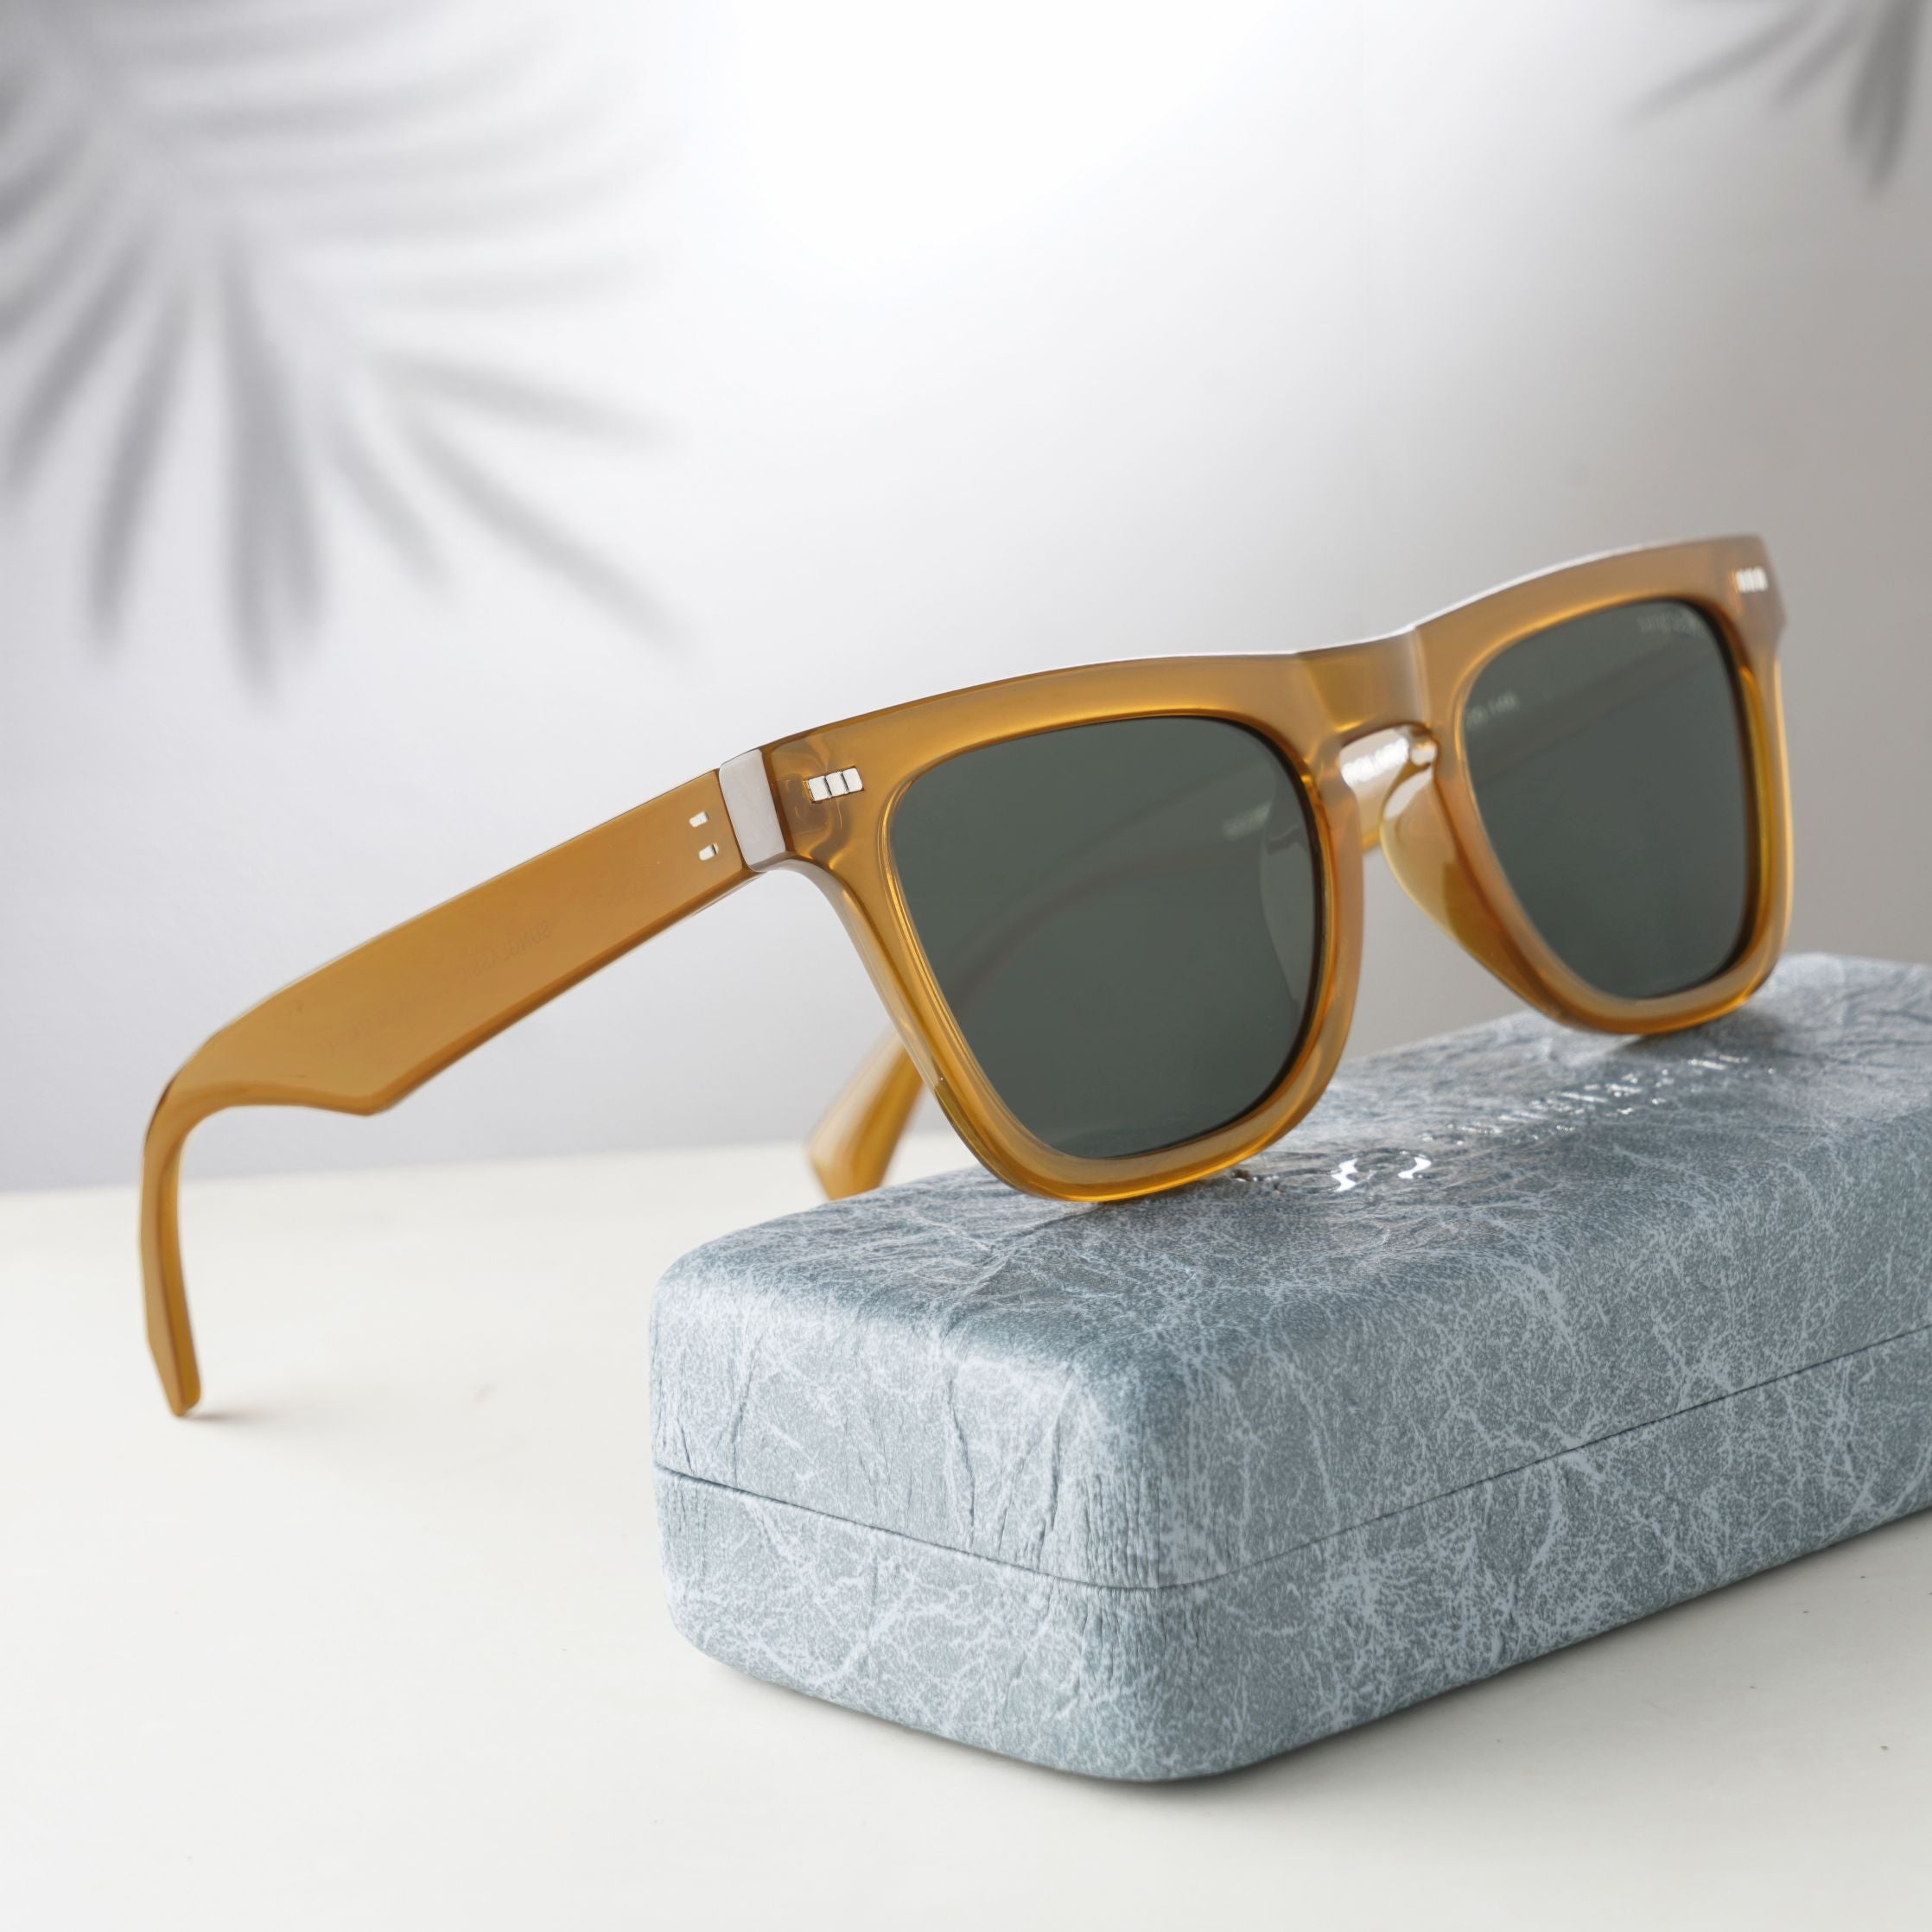 Peter Polarized Brown Green Square Sunglasses